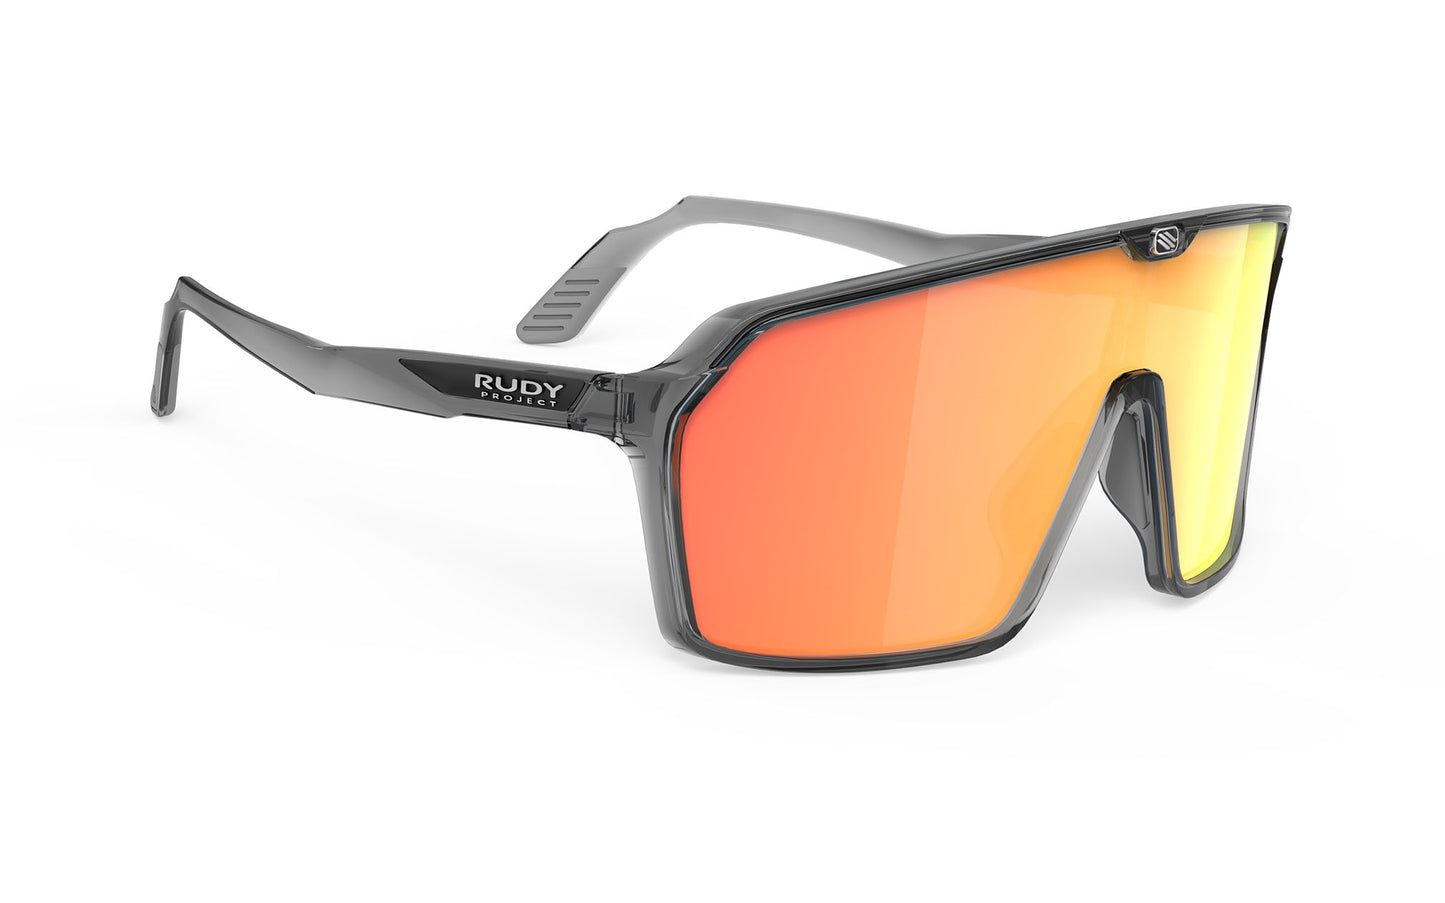 Load image into Gallery viewer, Rudy Project Spinshield Crystal Ash Rp Optics Orange Sunglasses
